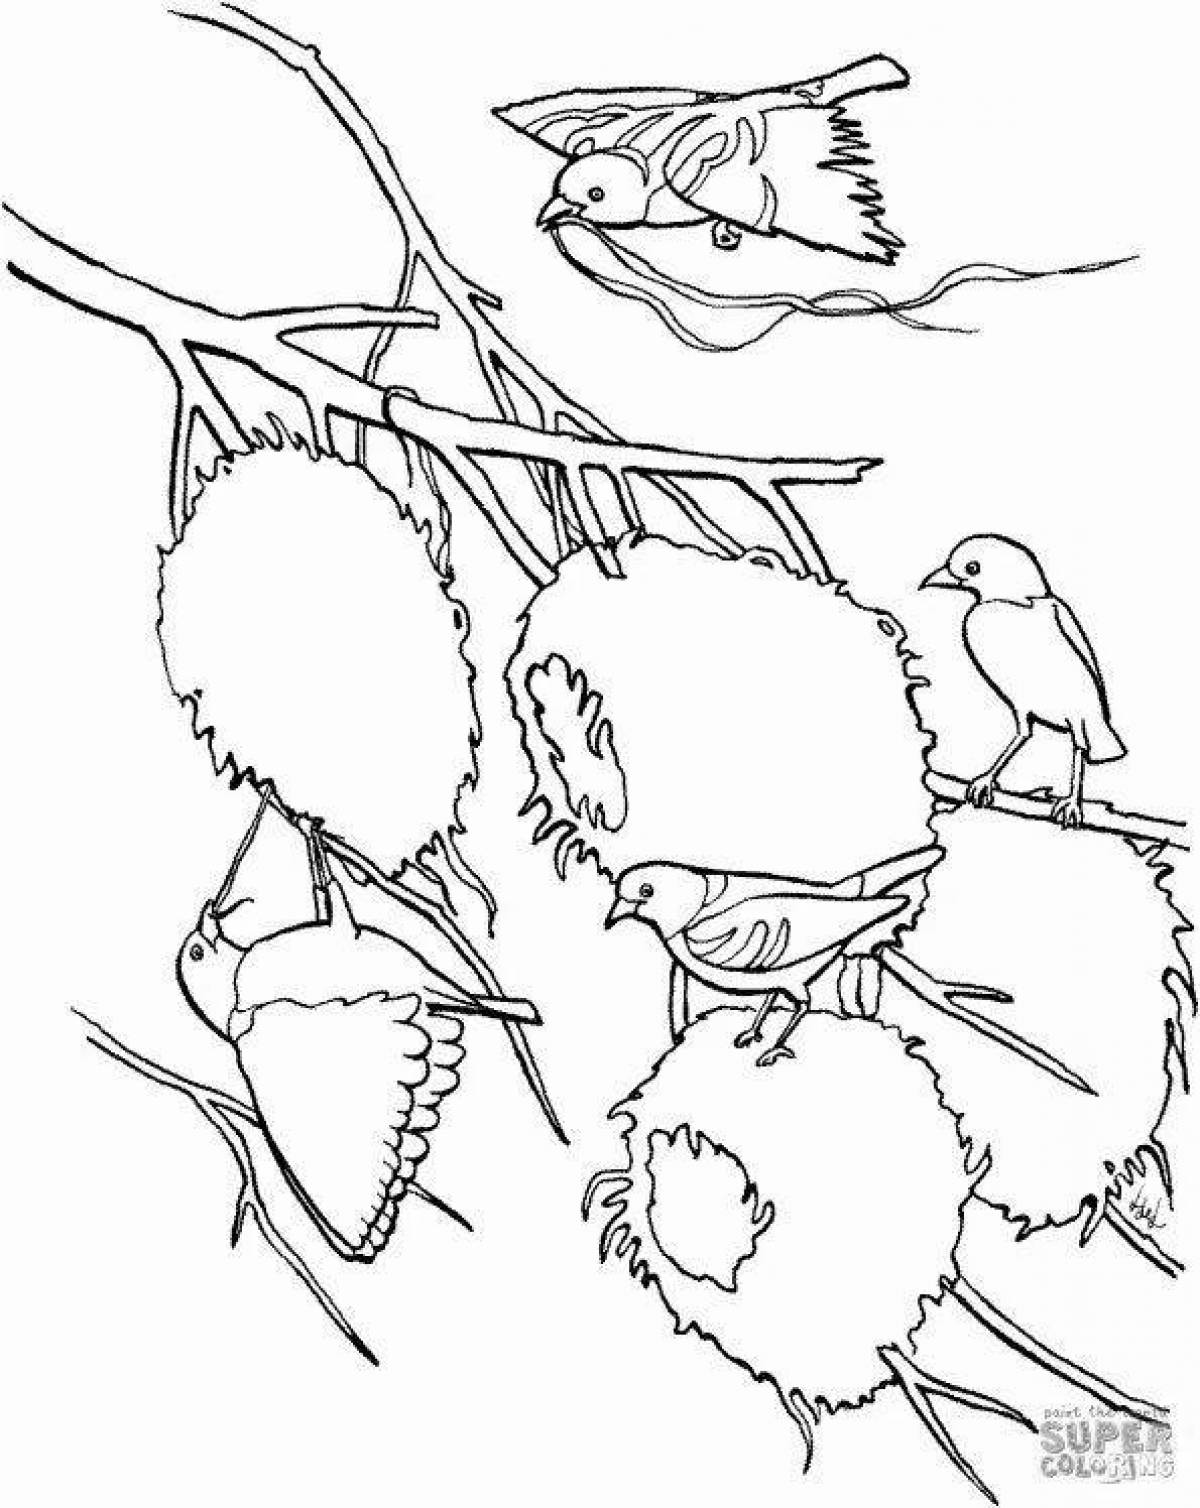 Coloring page charming handicraft